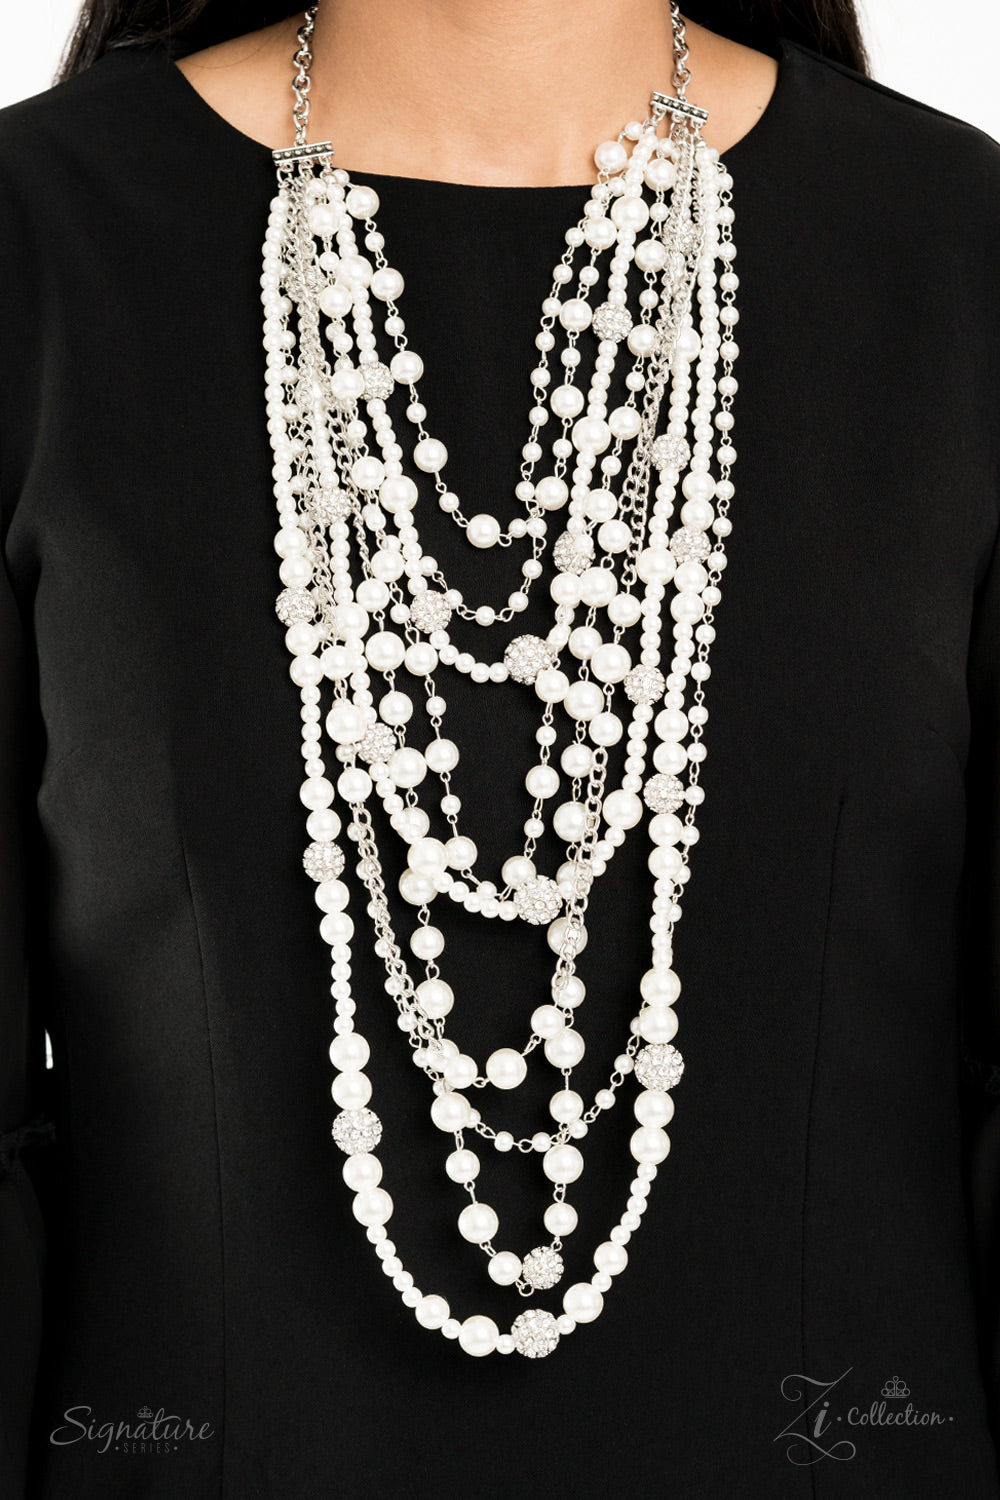 Paparazzi ZI Signature - The LeCricia - An elegant collection of timeless white pearls, shiny sections of silver chain, and bedazzling white rhinestone encrusted silver beads effortlessly cascade down the chest. The vintage inspired layers drape into breathtaking rows of radiance, resulting in an irresistible collision of romance. Features an adjustable clasp closure.